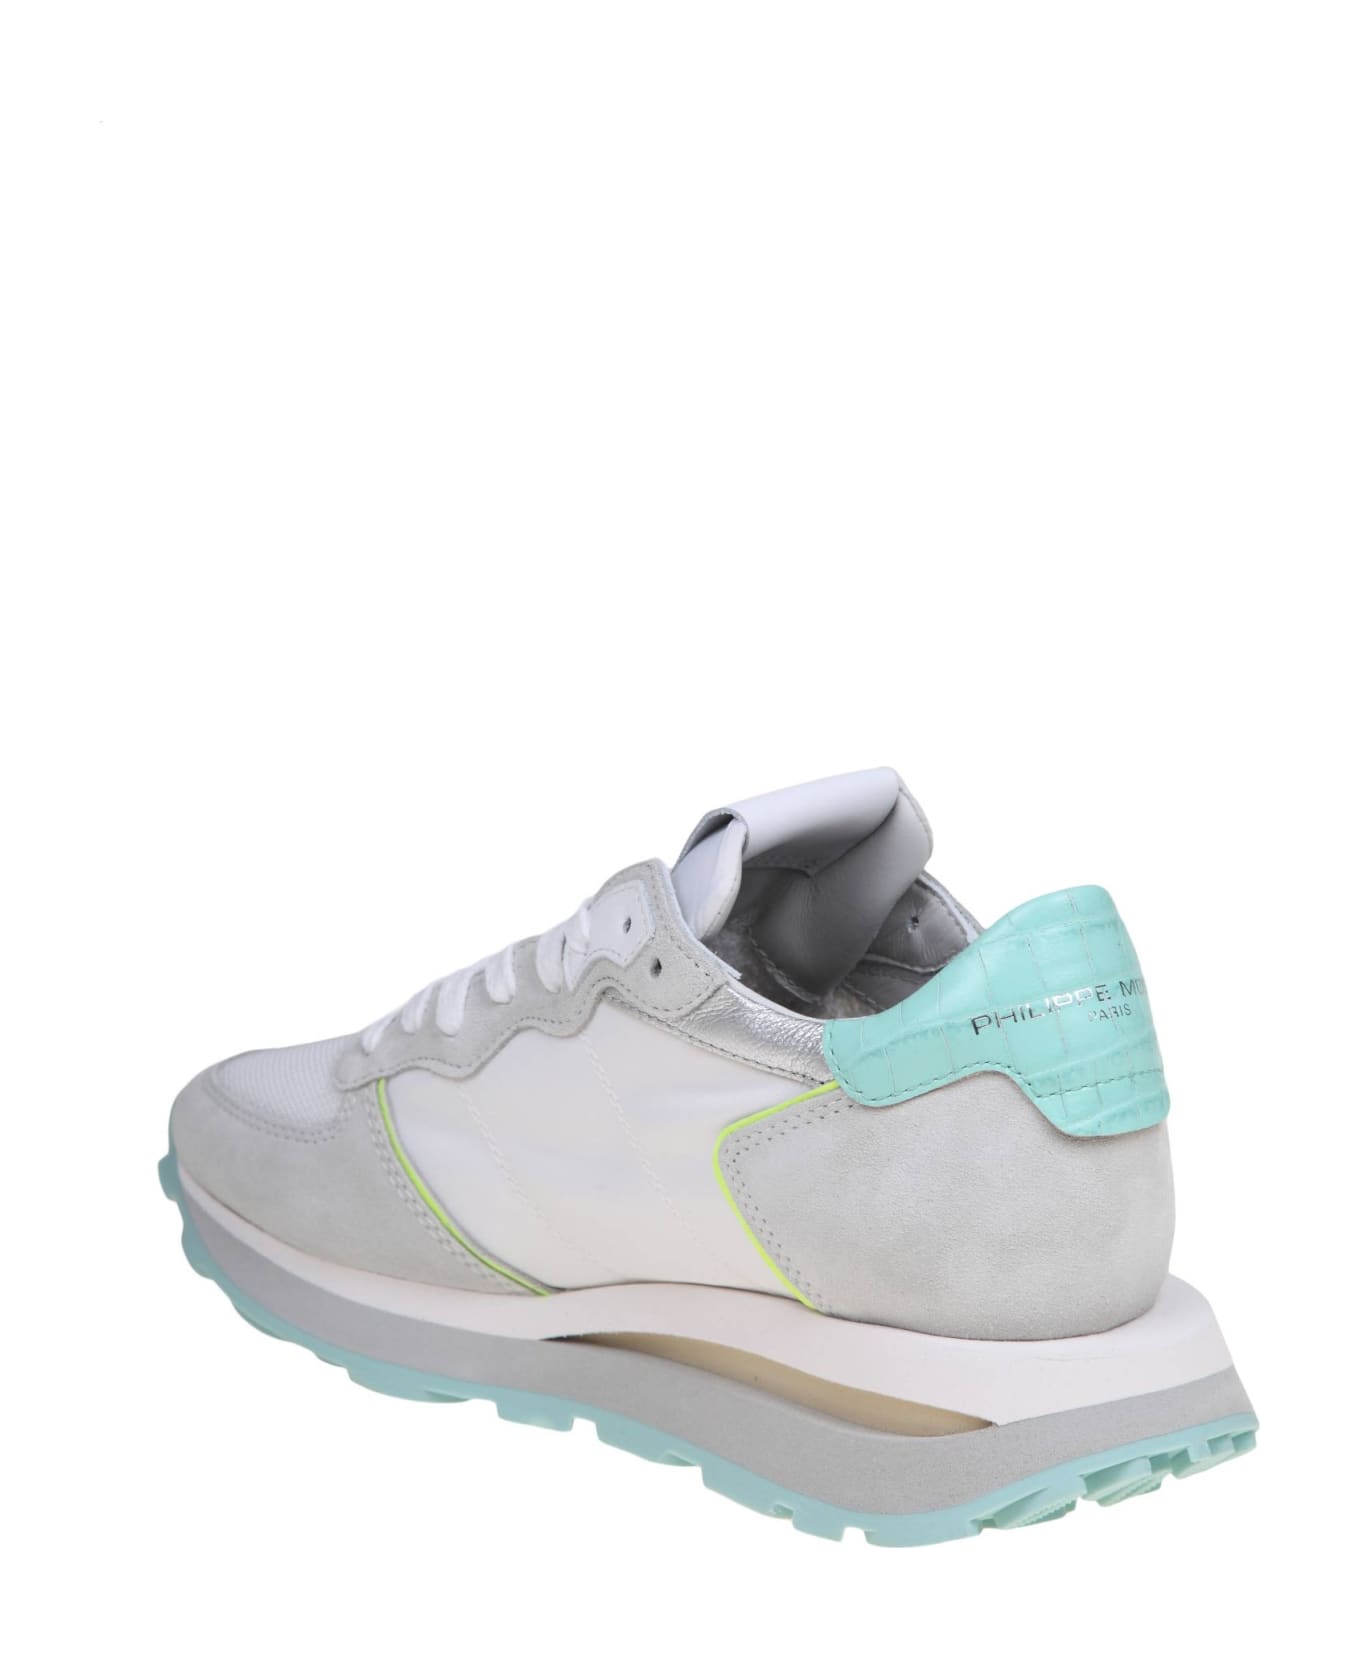 Philipp Plein Philippe Model Tropez Sneakers In Suede And Nylon Color White And Turquoise - WHITE